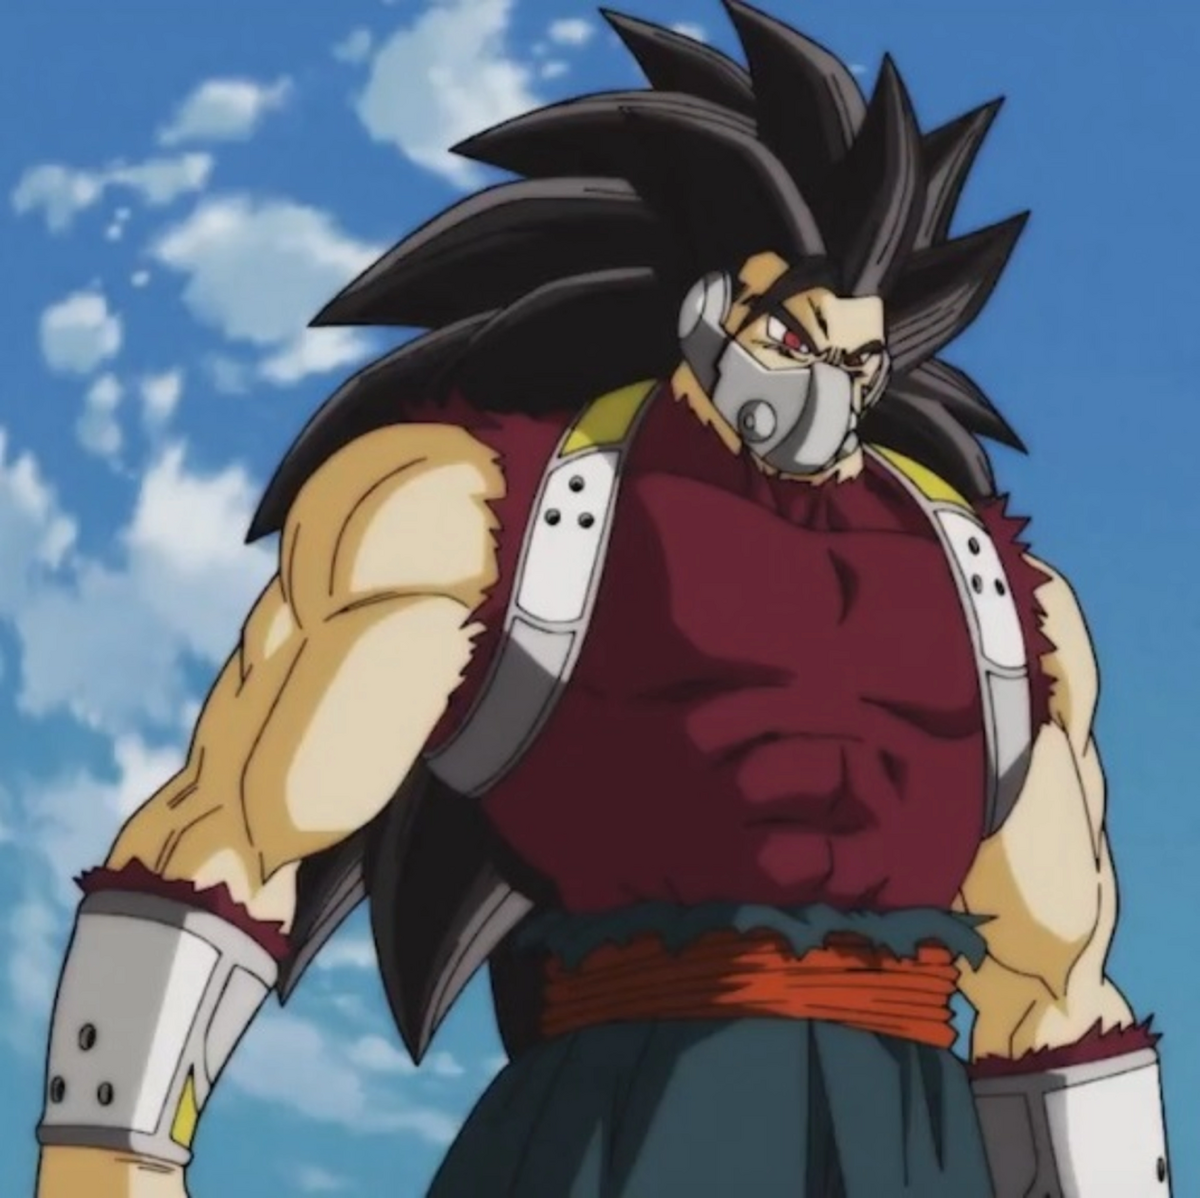 What would happen if Goku and Vegeta went after Broly when he was a kid  instead of Raditz? - Quora